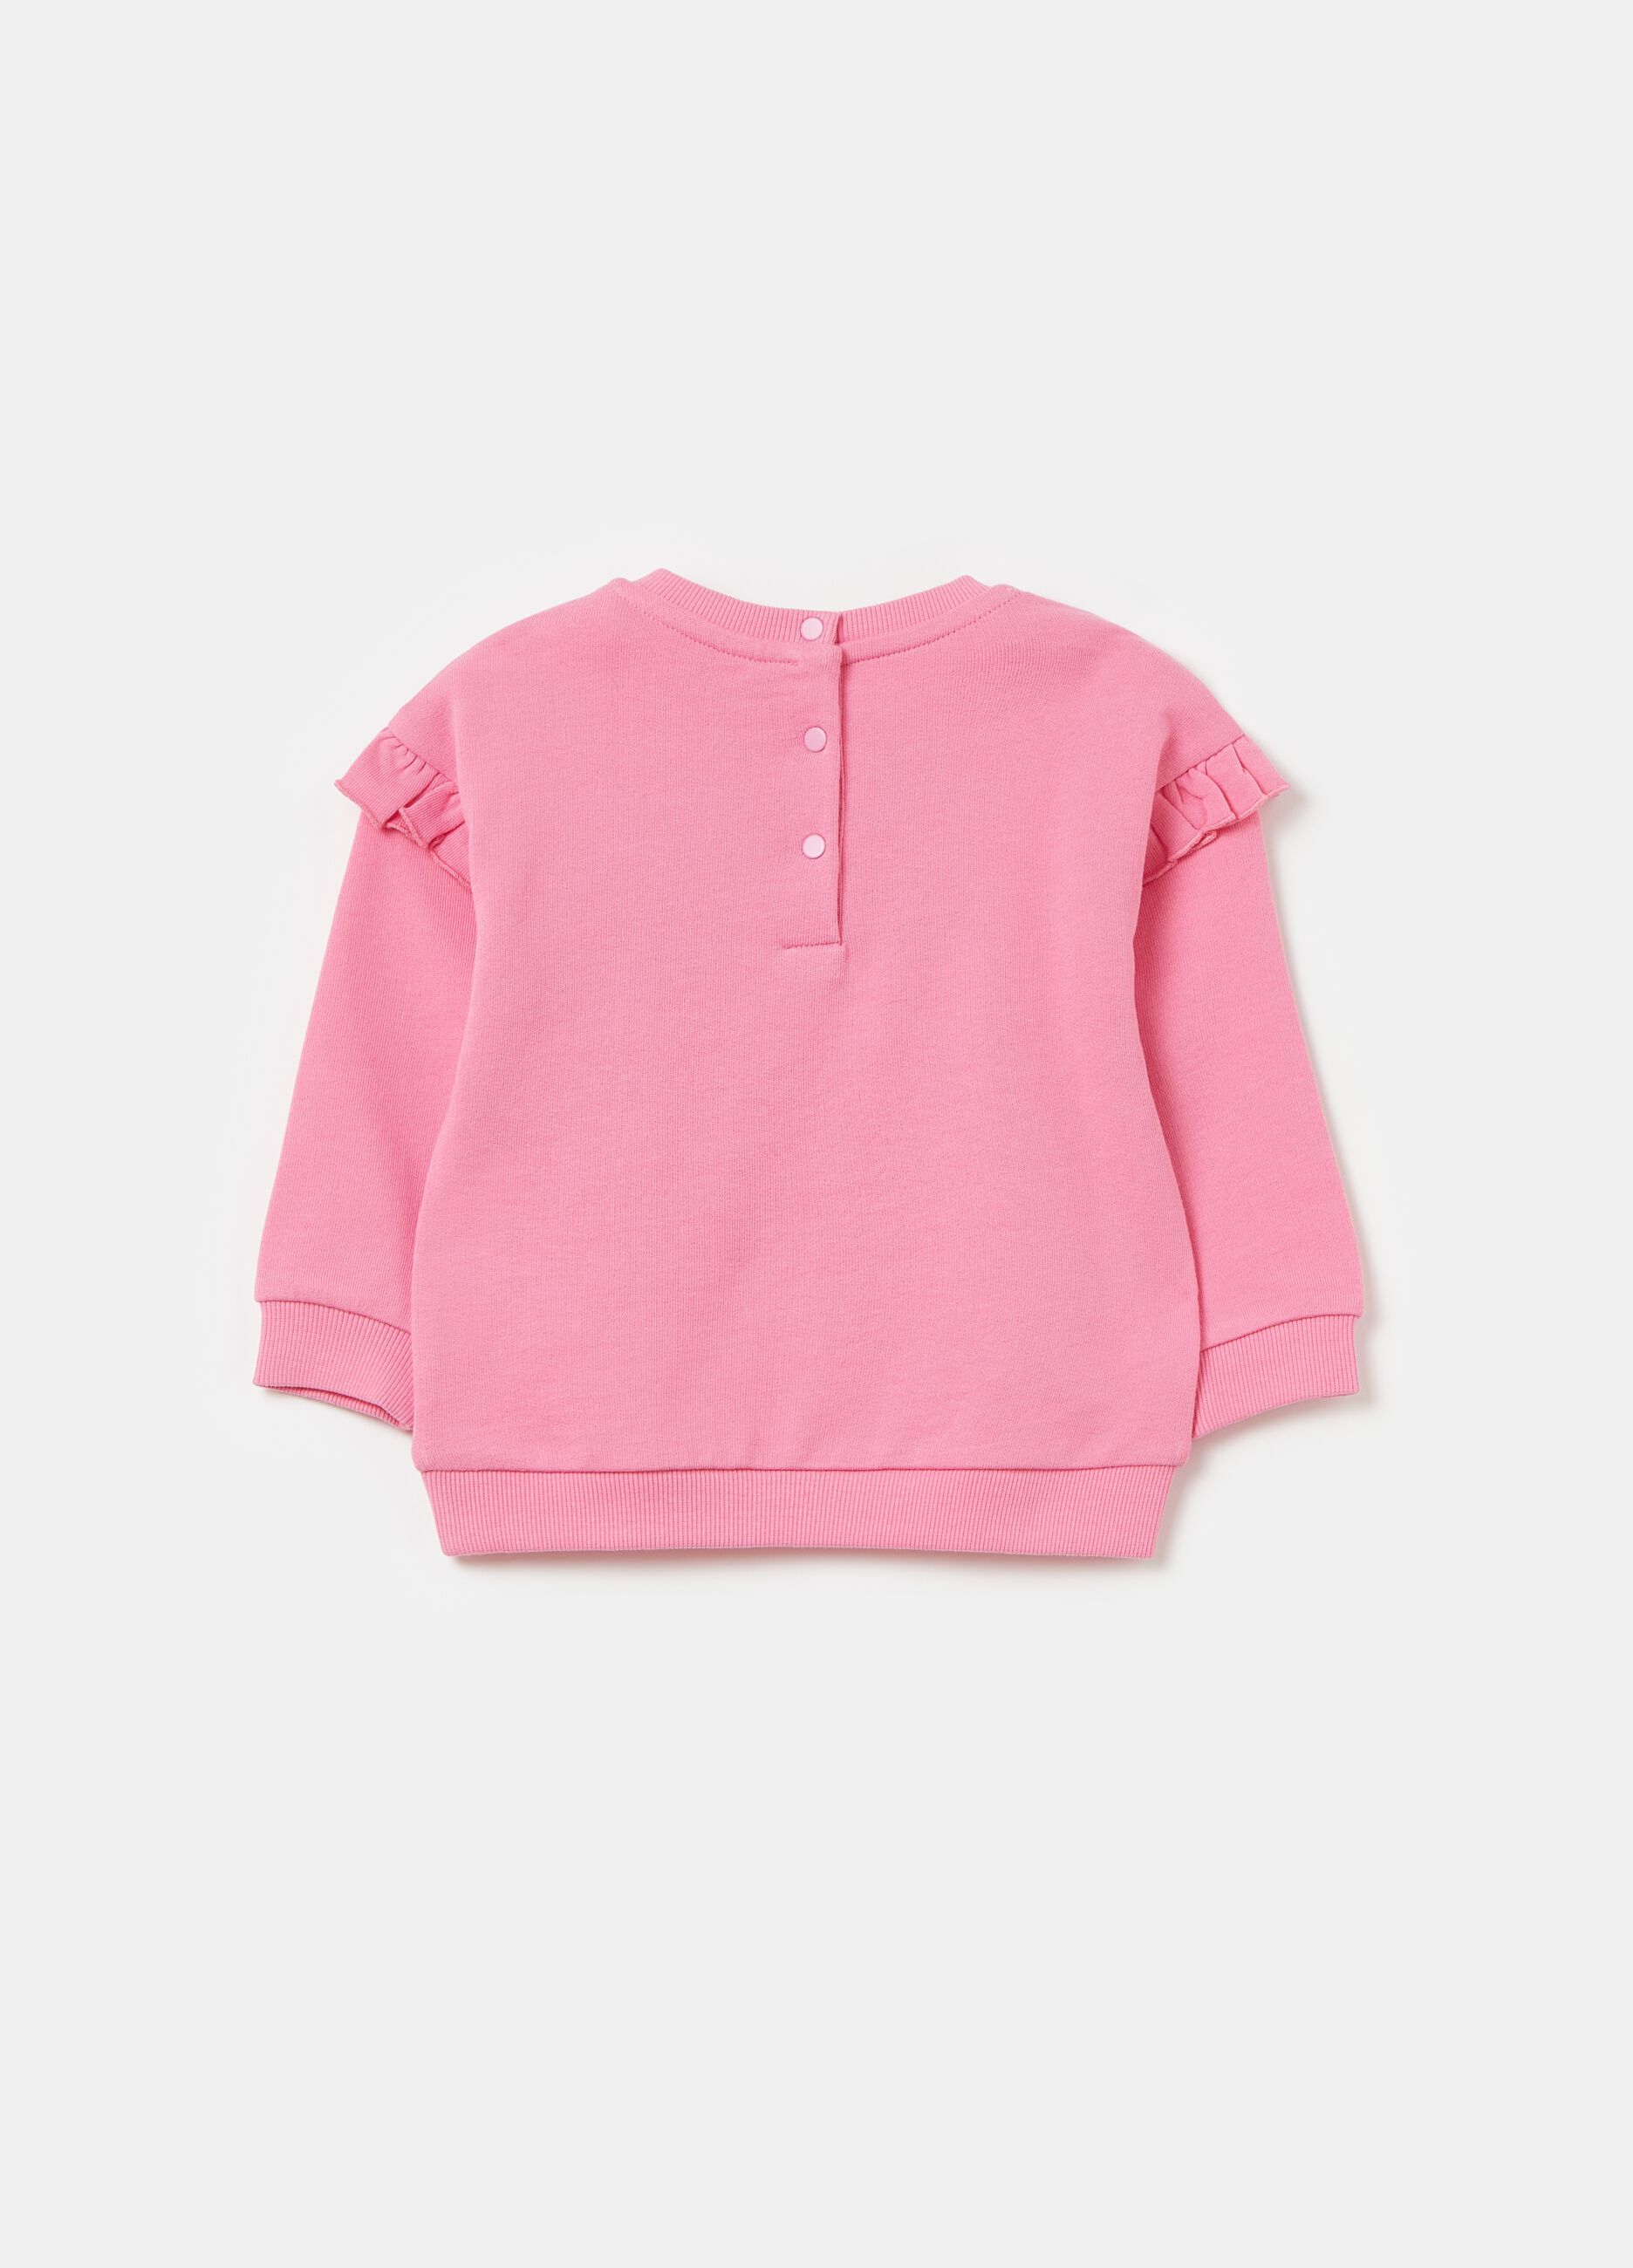 Sweatshirt in French terry with frills